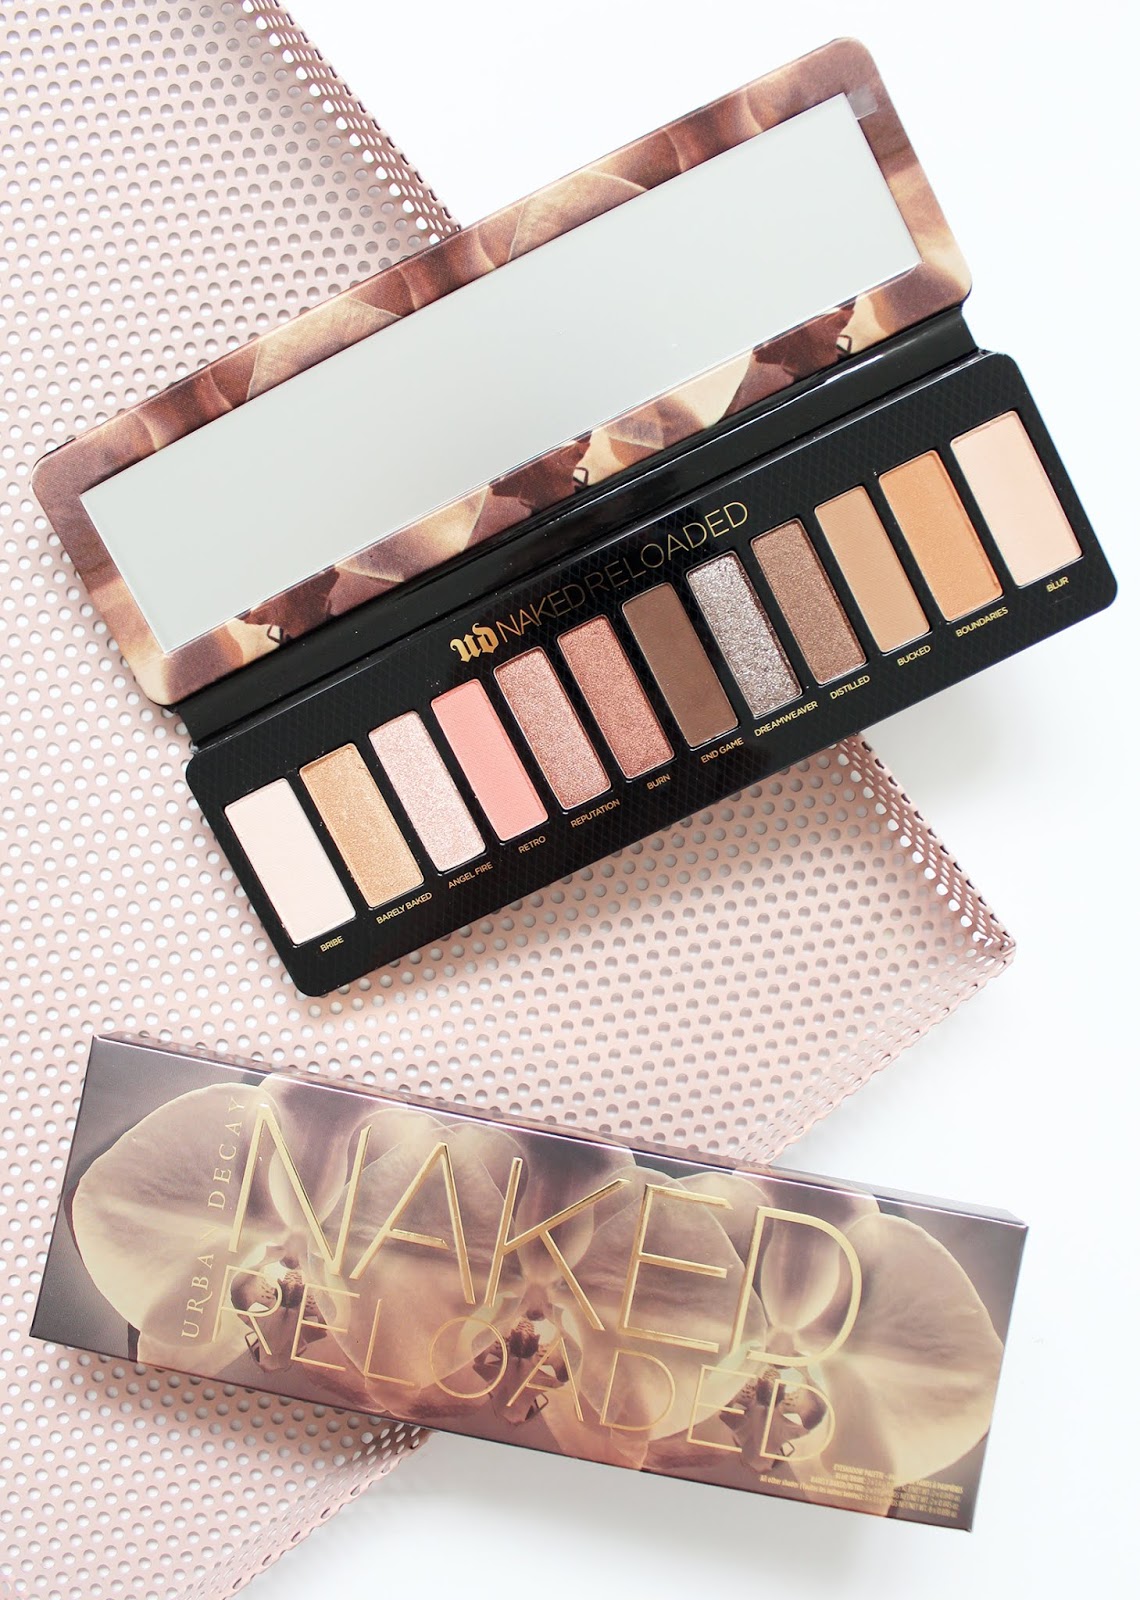 URBAN DECAY | Naked Reloaded Eyeshadow Palette - Review + Swatches - CassandraMyee